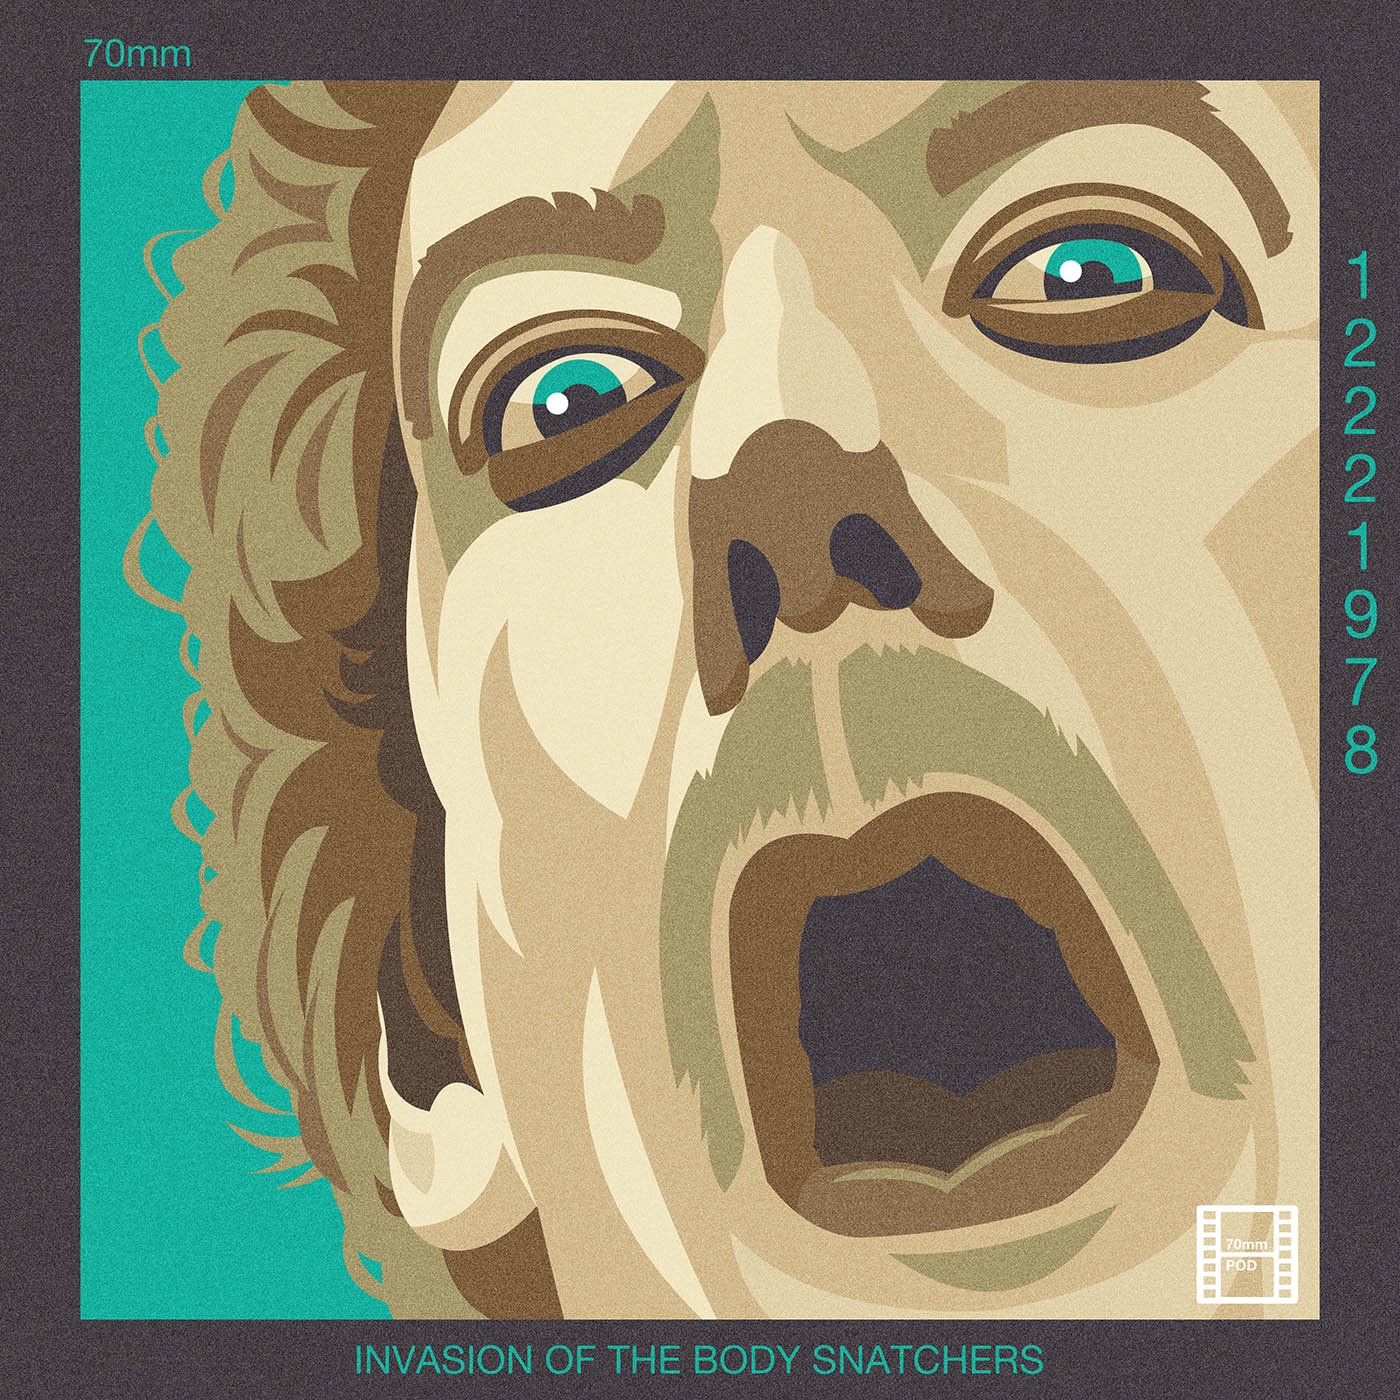 Episode 38: Invasion of the Body Snatchers